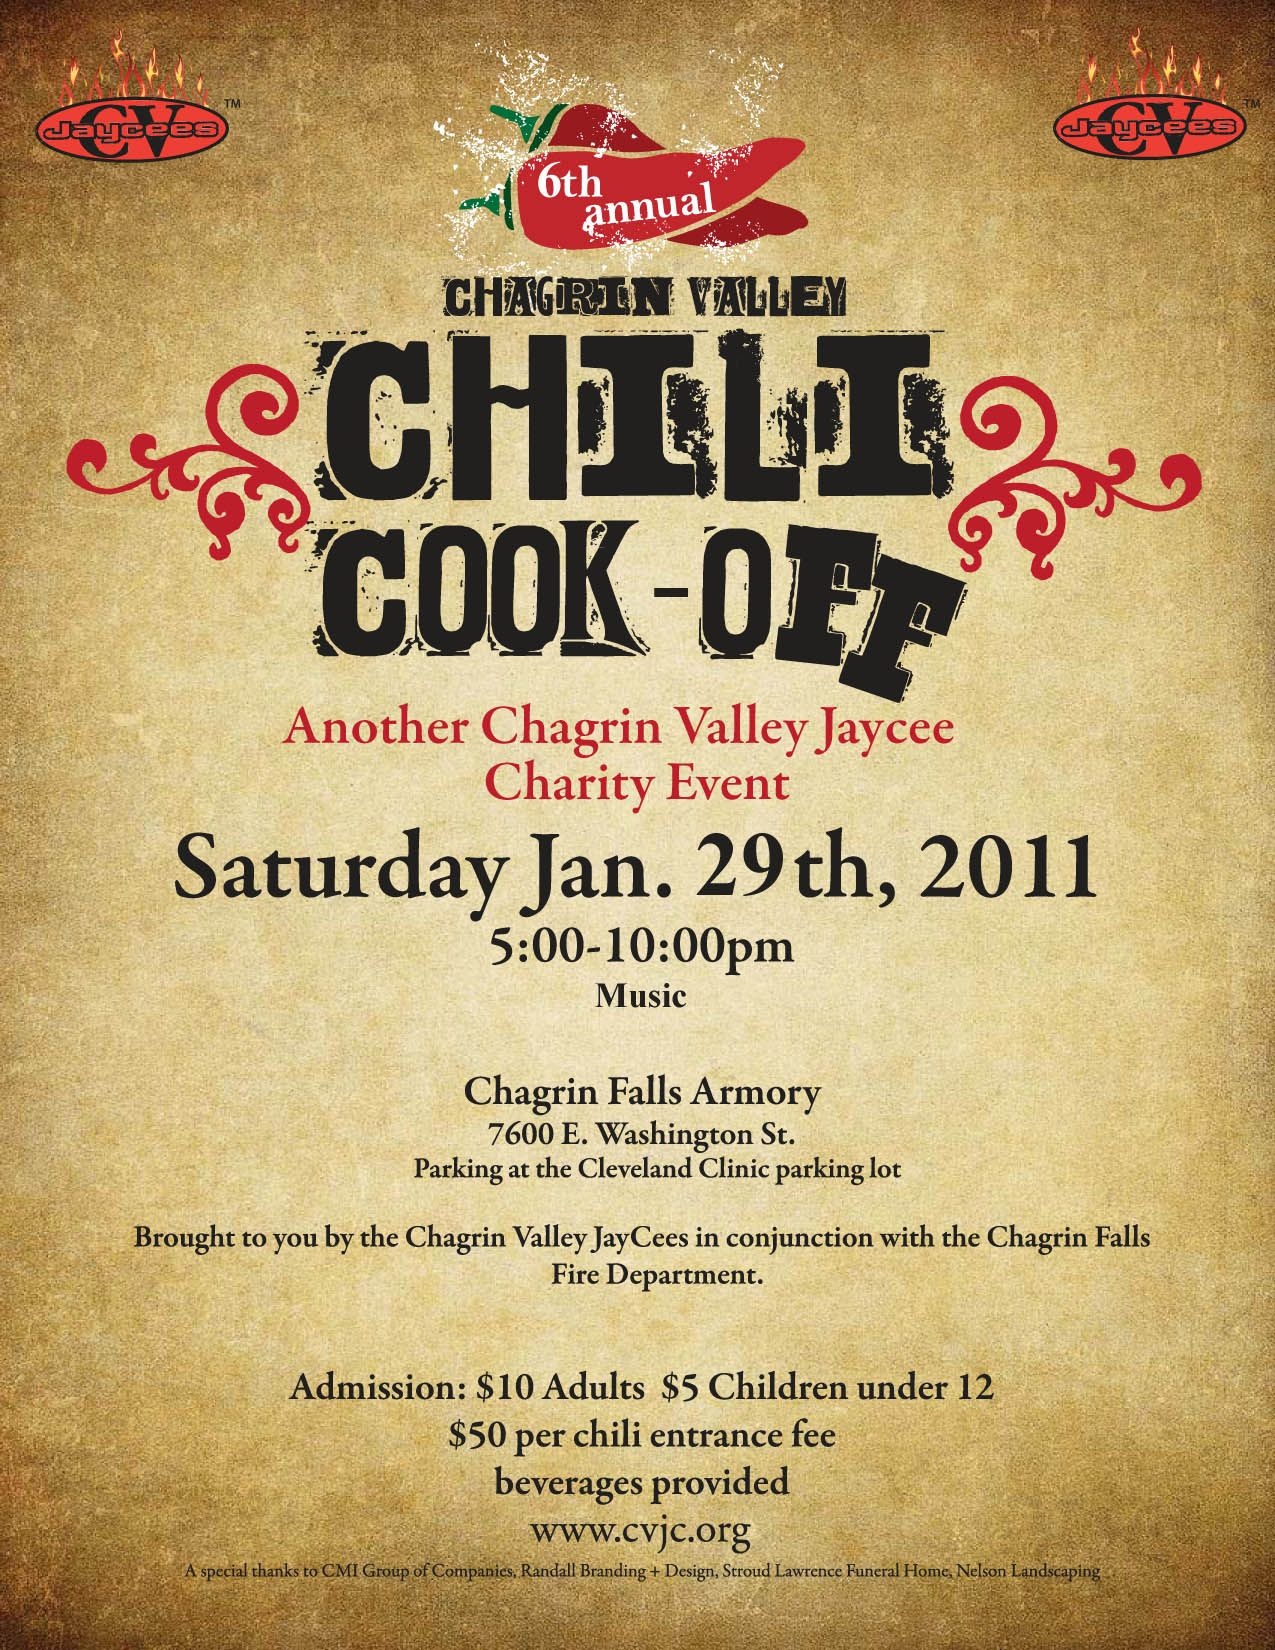 Chili Cook Off Flyer Template Free Printable - Wow - Image - Free Printable Event Flyer Templates